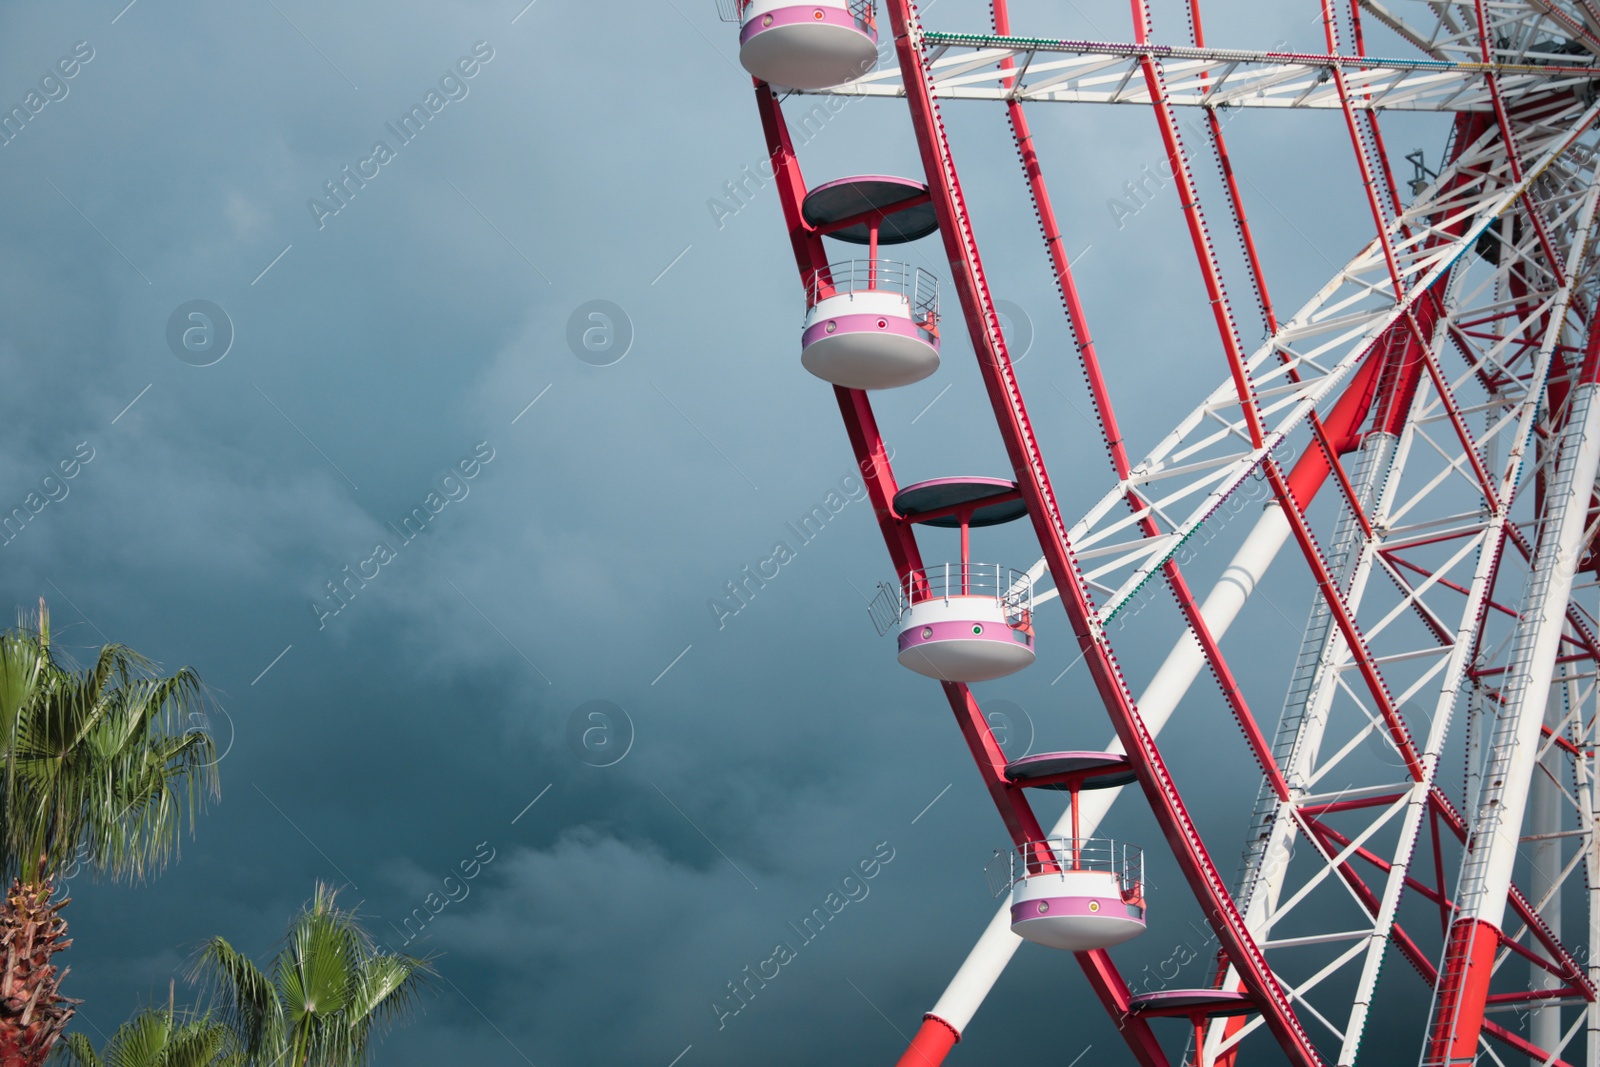 Photo of Beautiful large Ferris wheel against heavy rainy clouds outdoors. Space for text